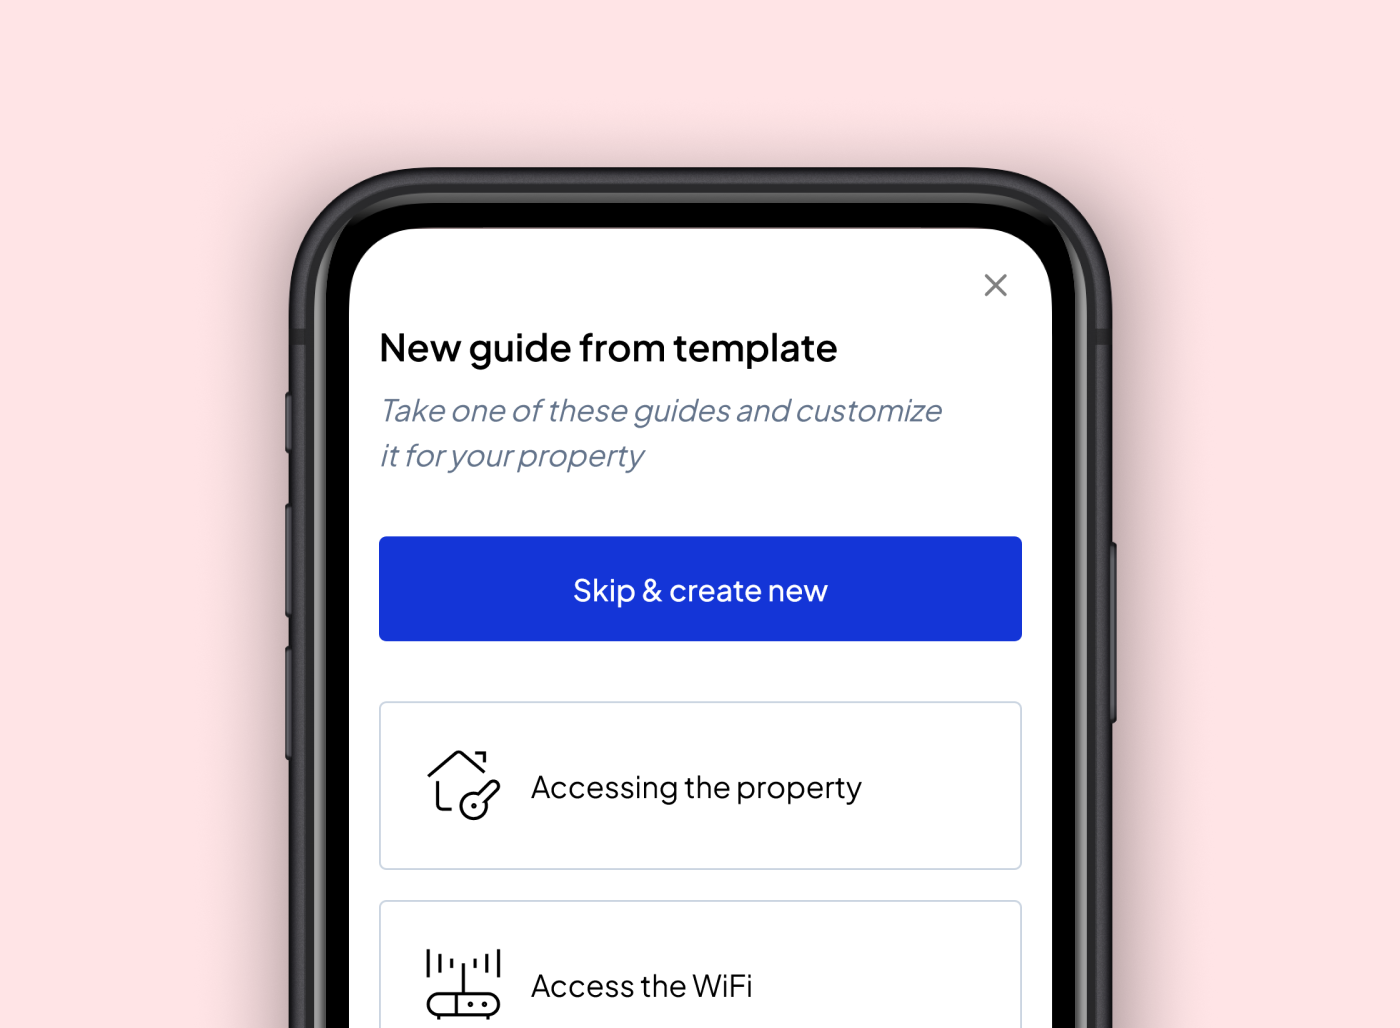 Create a new guide from template interface screenshot from within the app